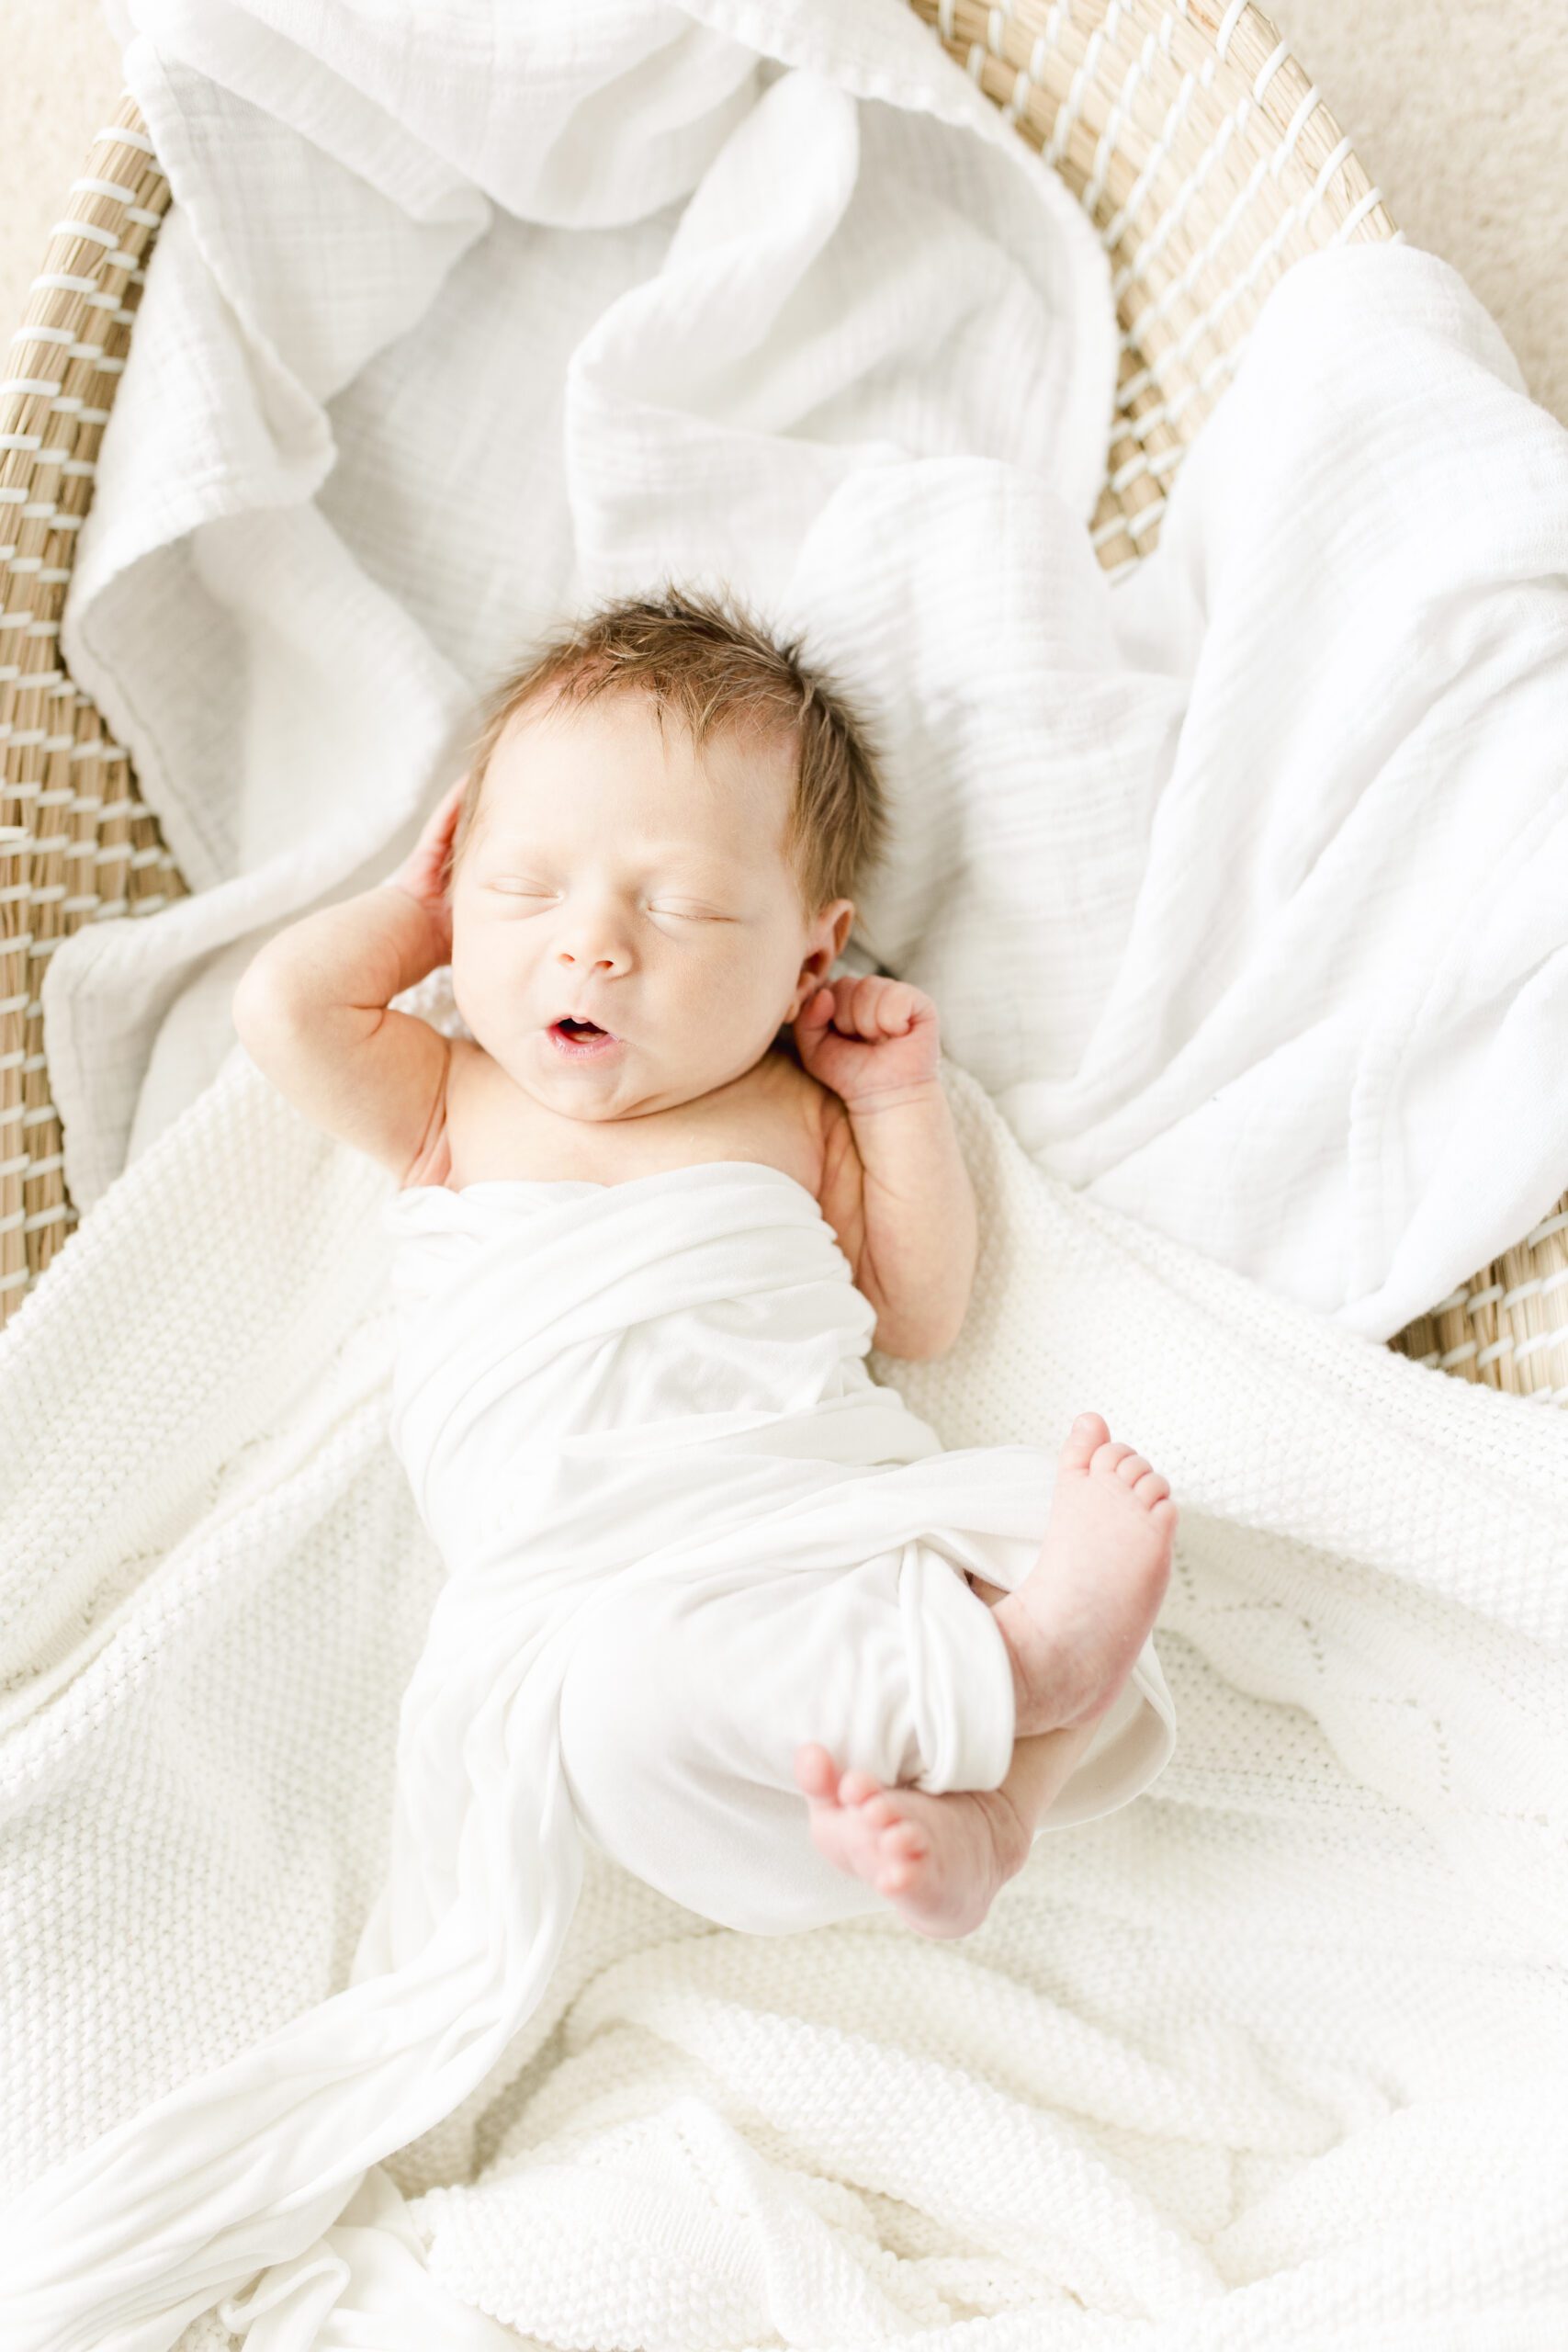 newborn baby girl stretching out in a woven basket